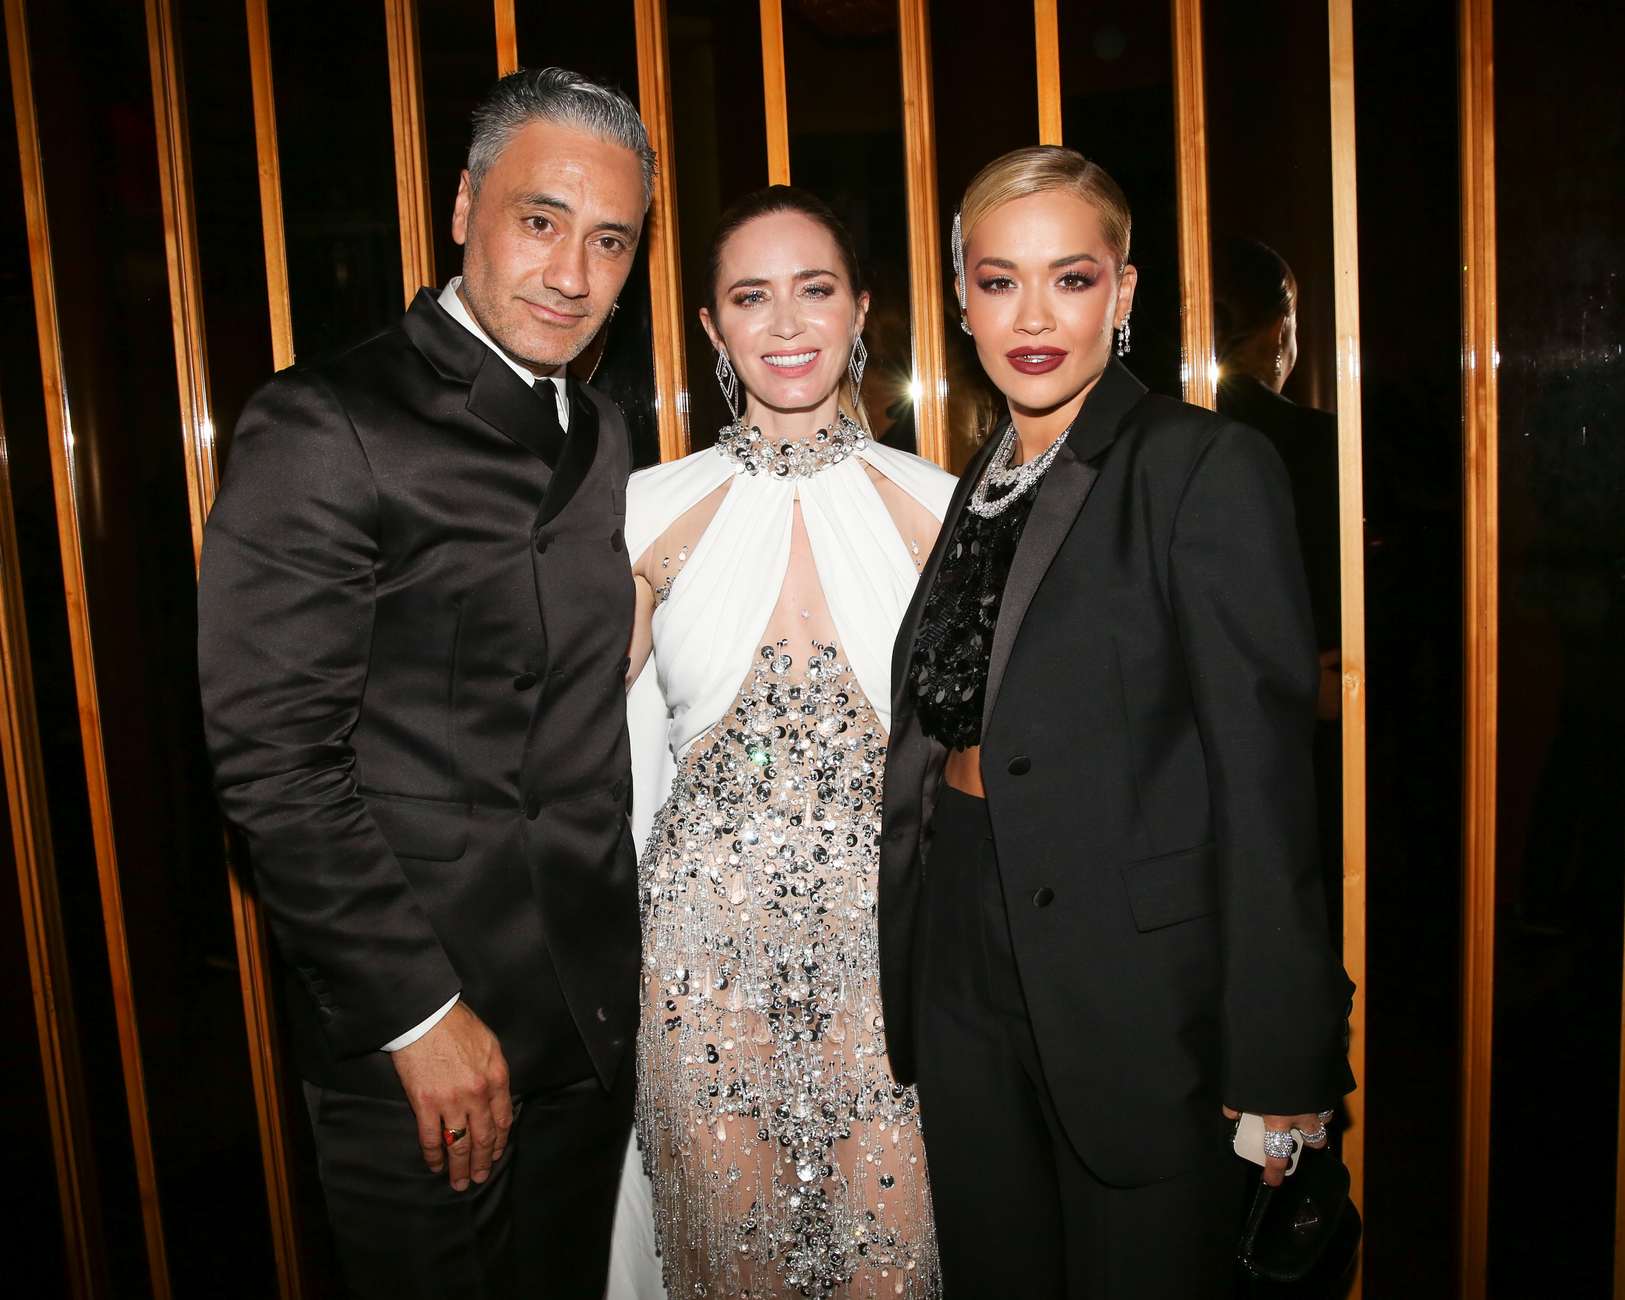 Emily_Blunt___Rita_Ora_-_attend_the_Boom_Boom_after-party_in_New_York_City2C_0913202101.jpg